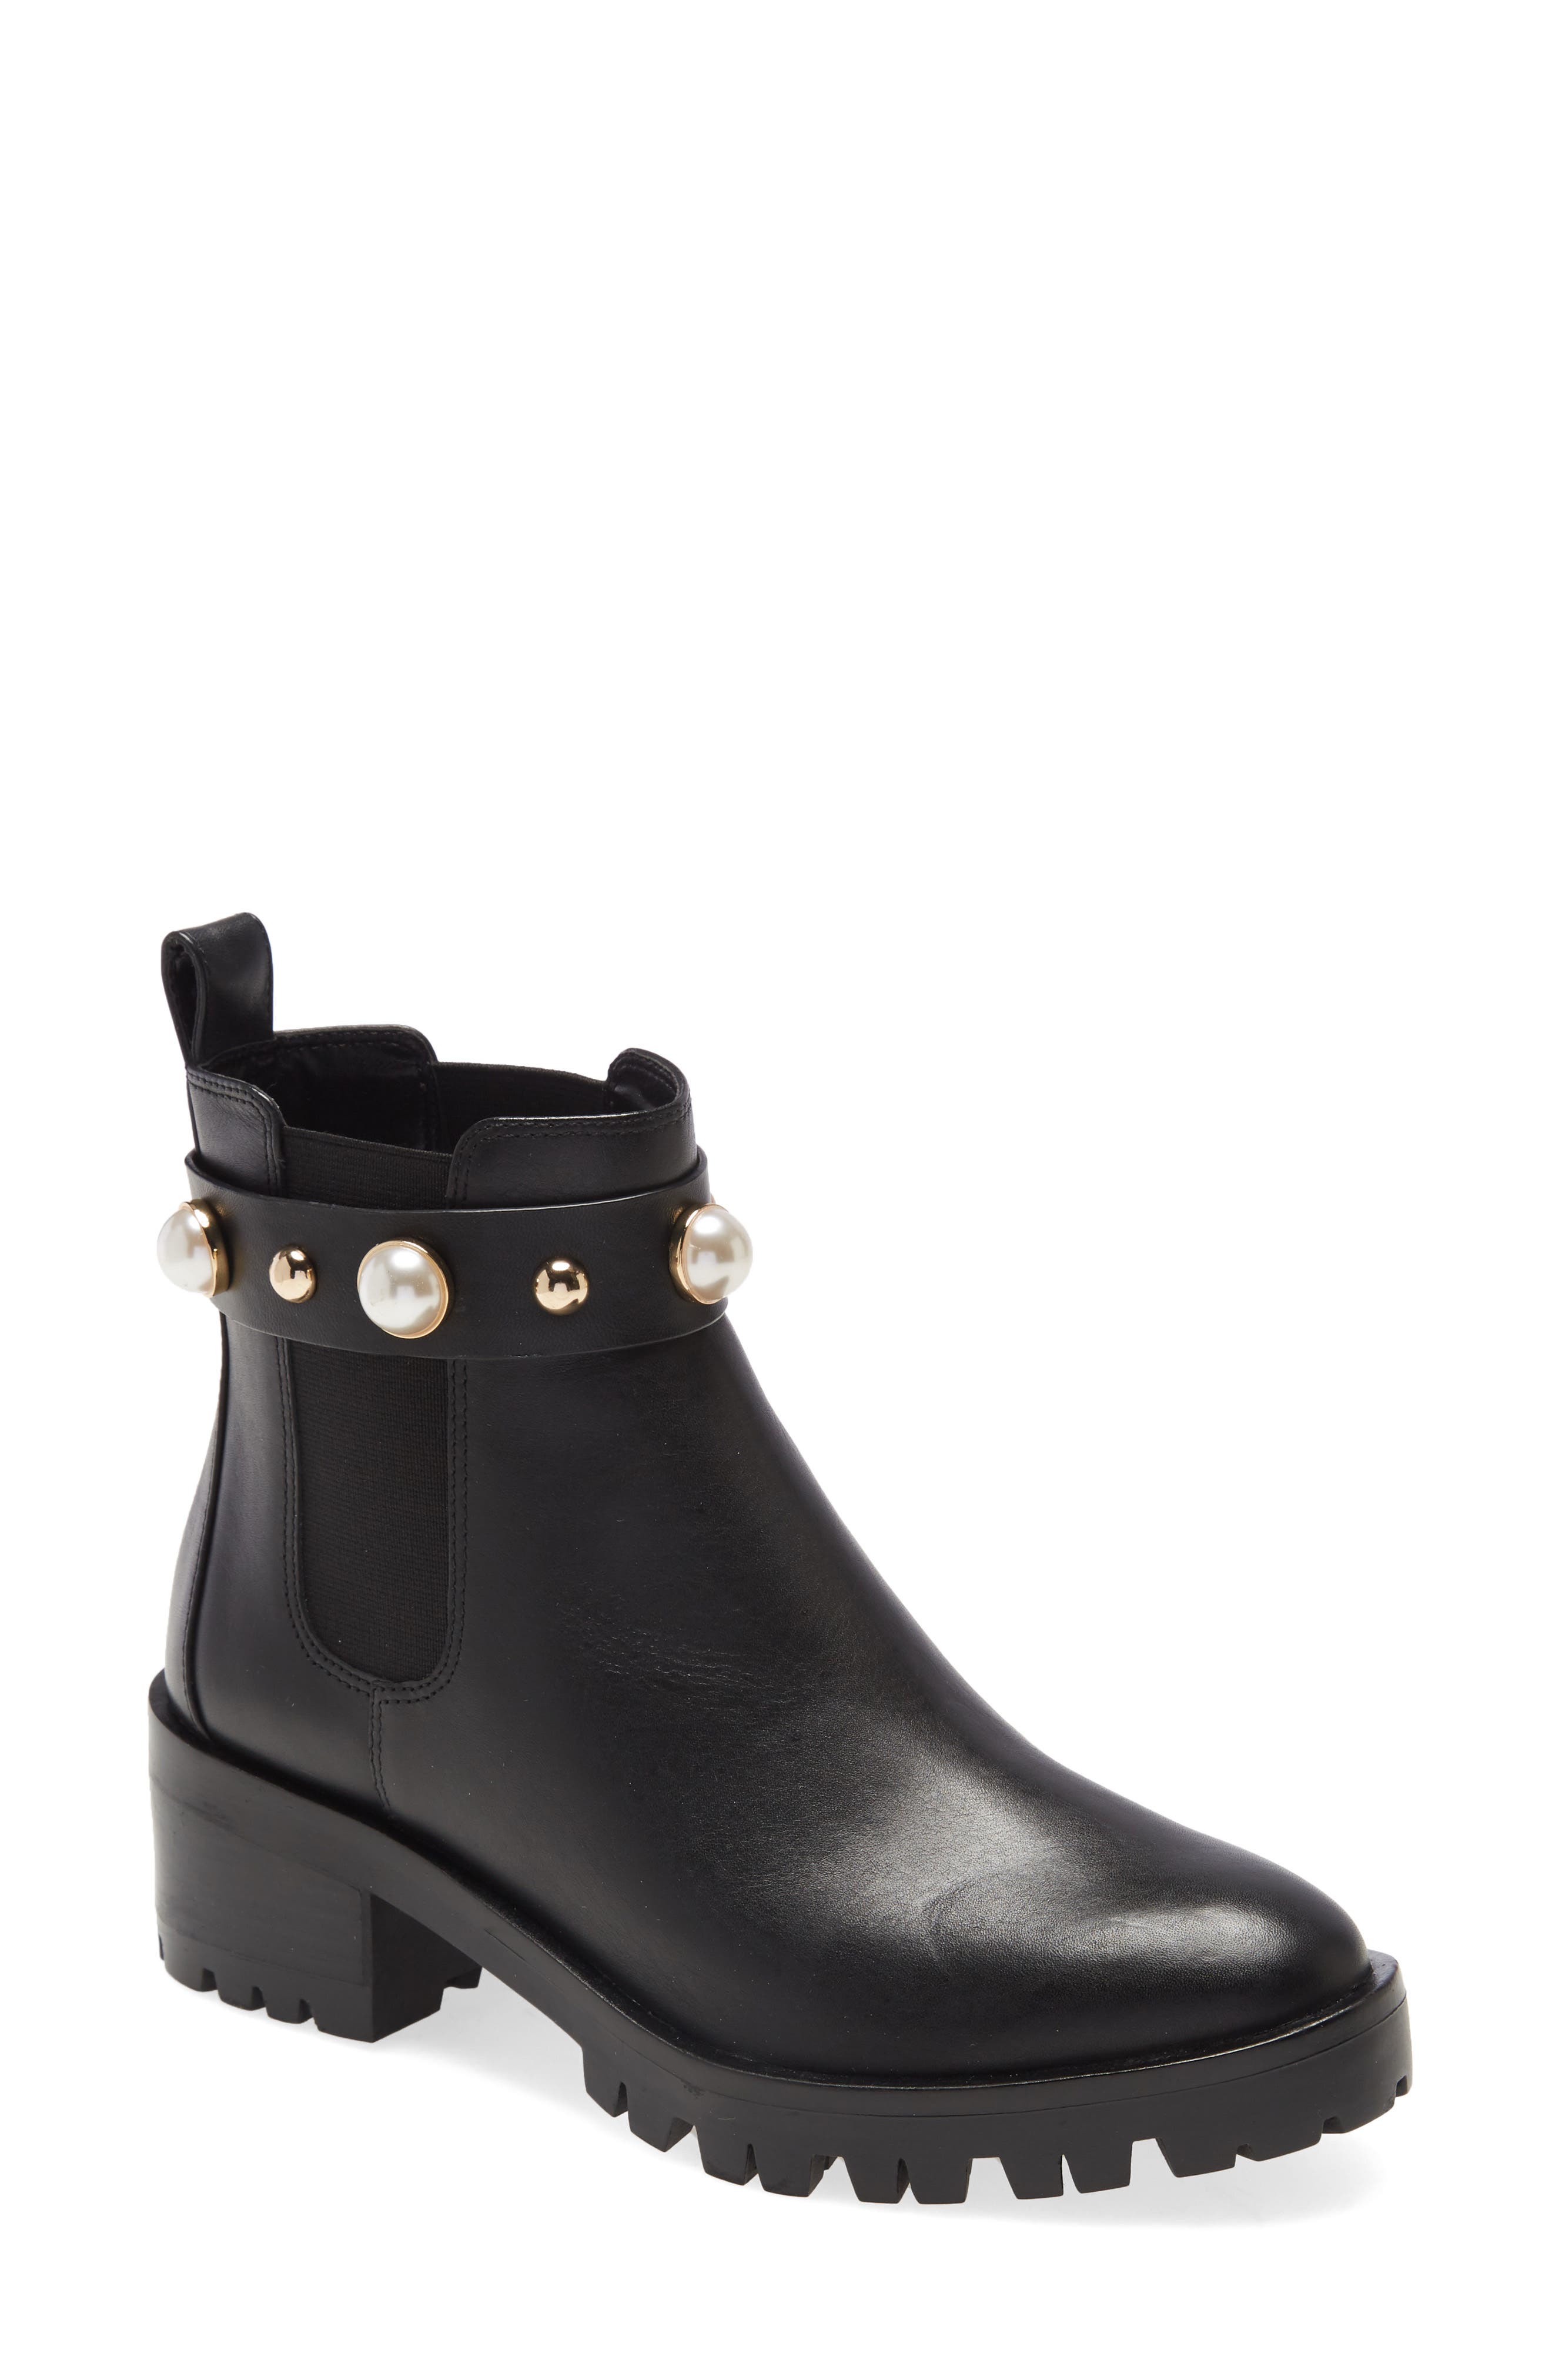 karl lagerfeld paris saxe ankle boot